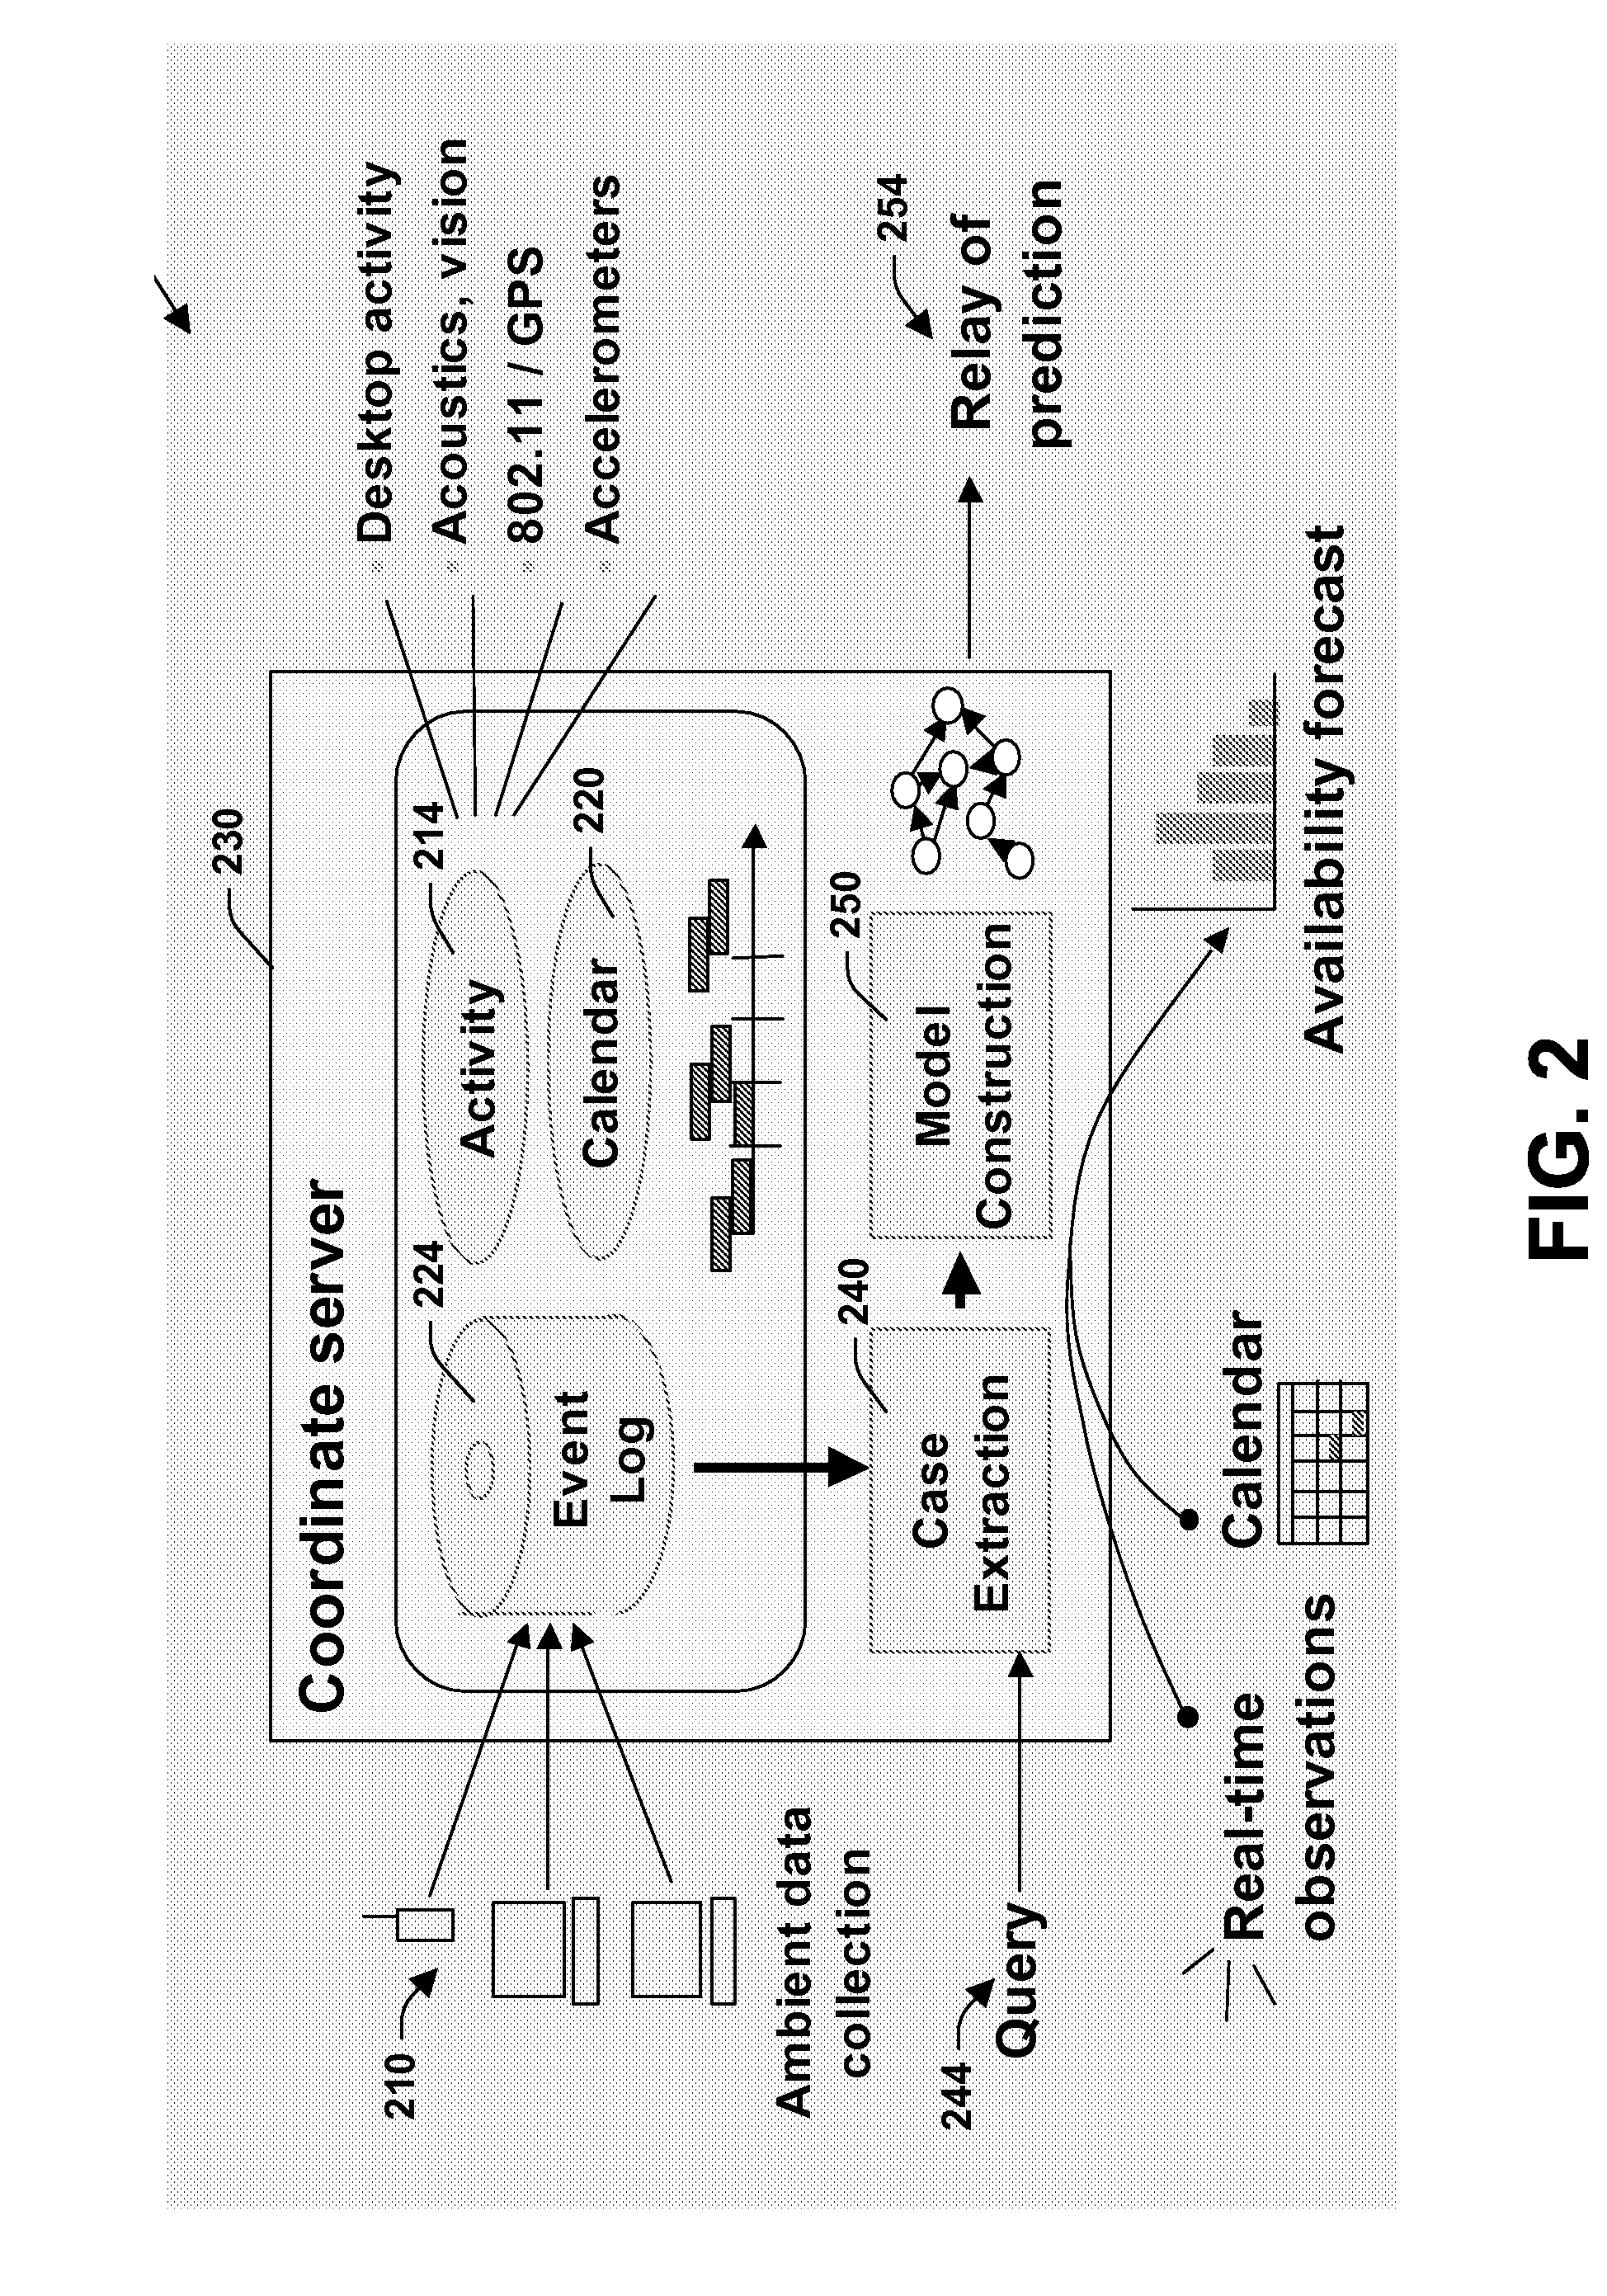 Methods and architecture for cross-device activity monitoring, reasoning, and visualization for providing status and forecasts of a users' presence and availability